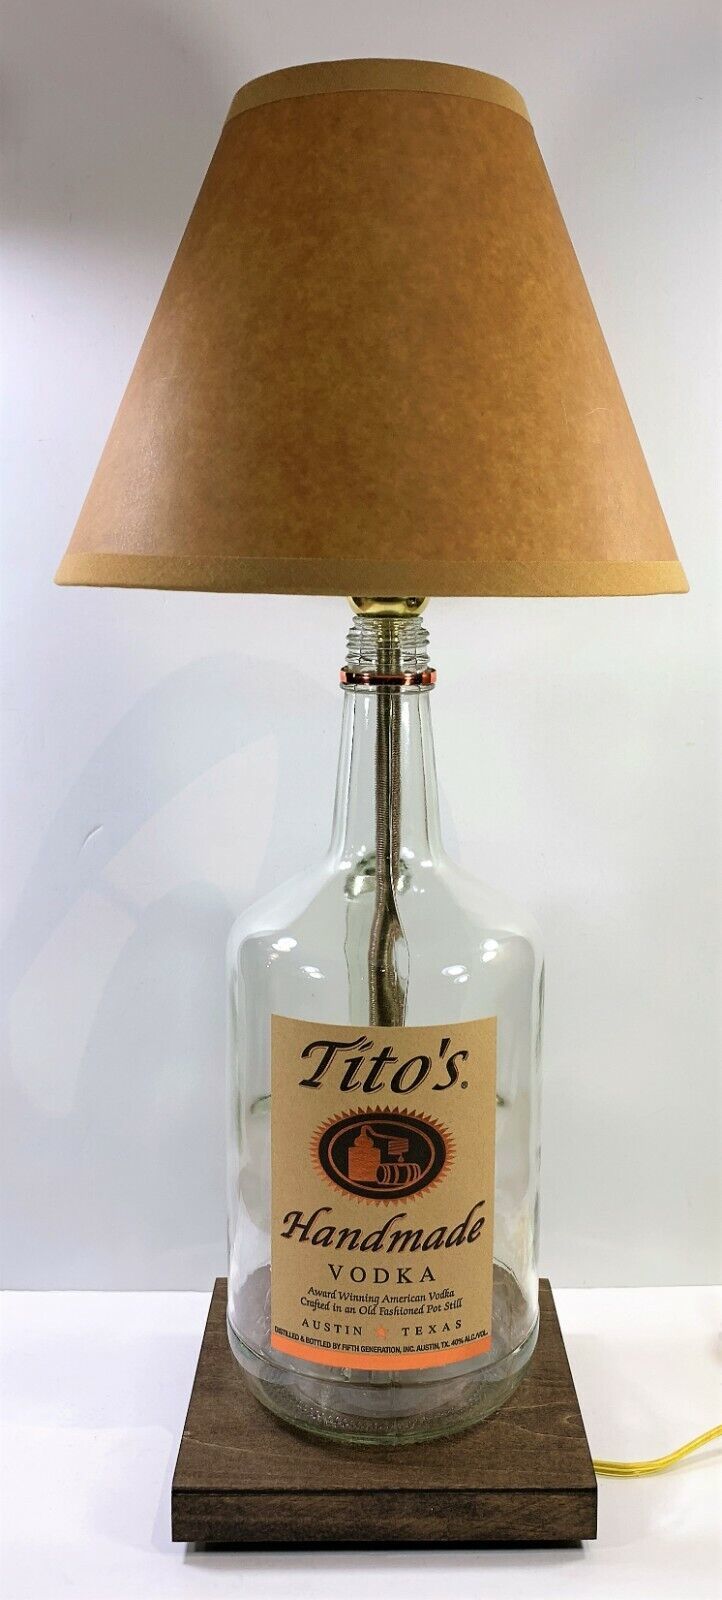 Primary image for Tito's Vodka Large 1.75L Bottle TABLE LAMP Light with KRAFT Lamp Shade LED Bulb